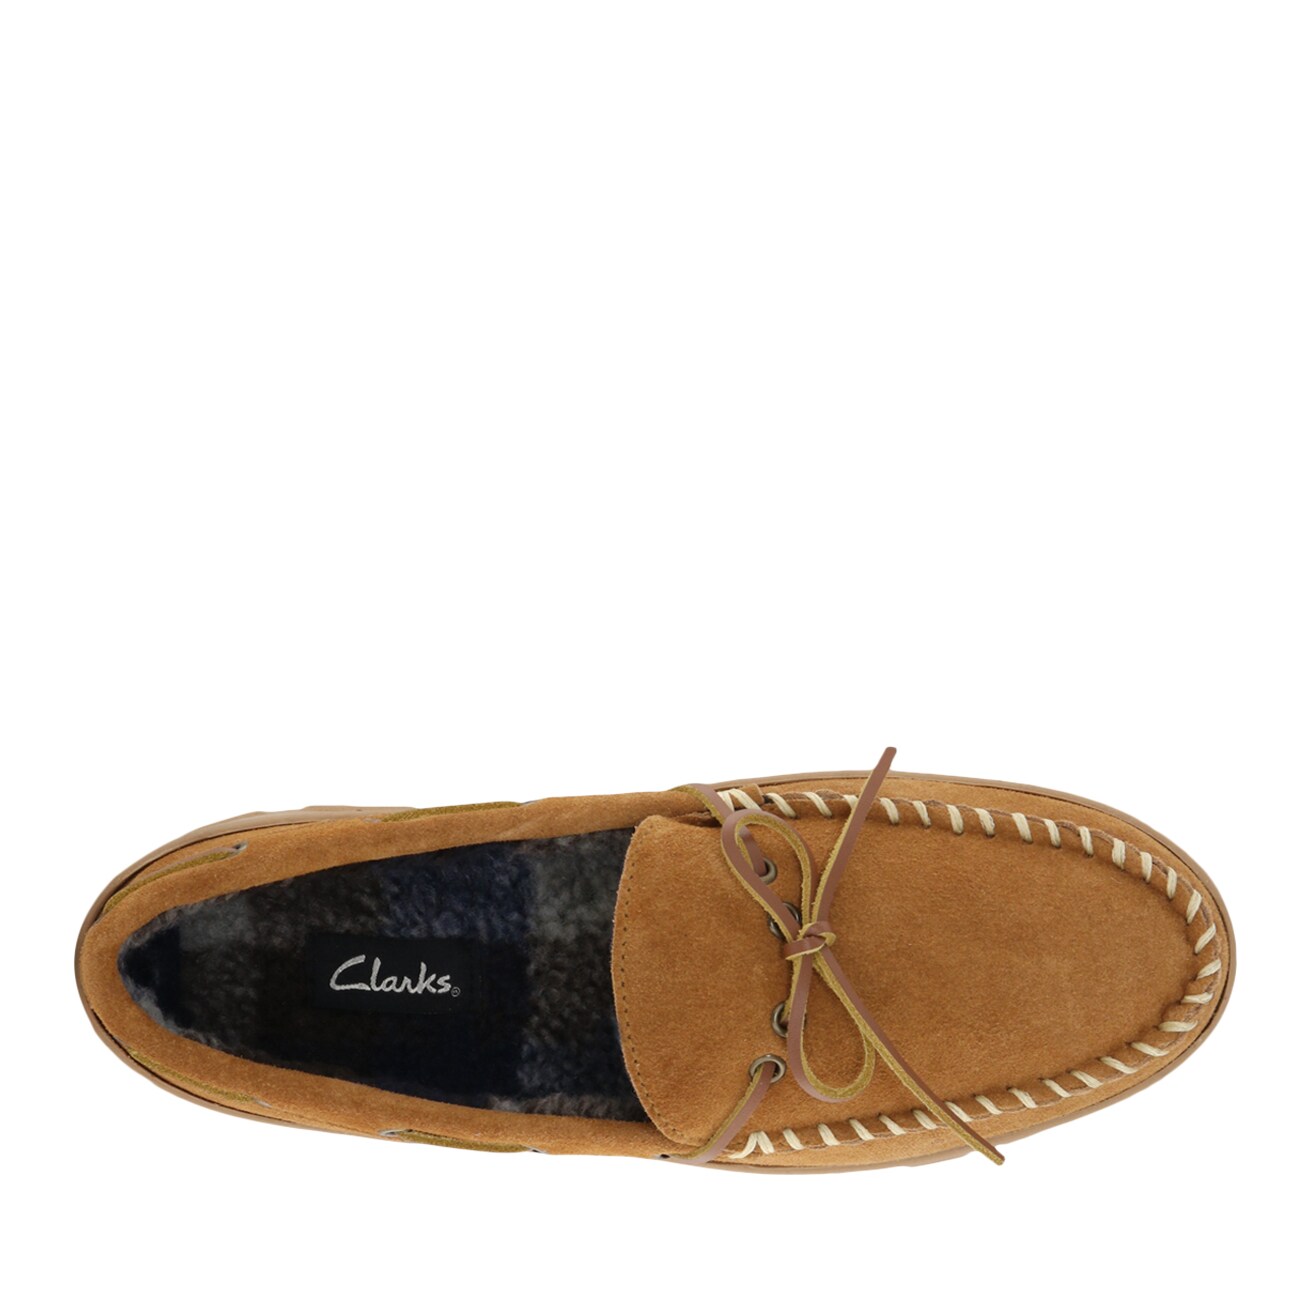 Clarks Moccasin Slippers | The Shoe Company